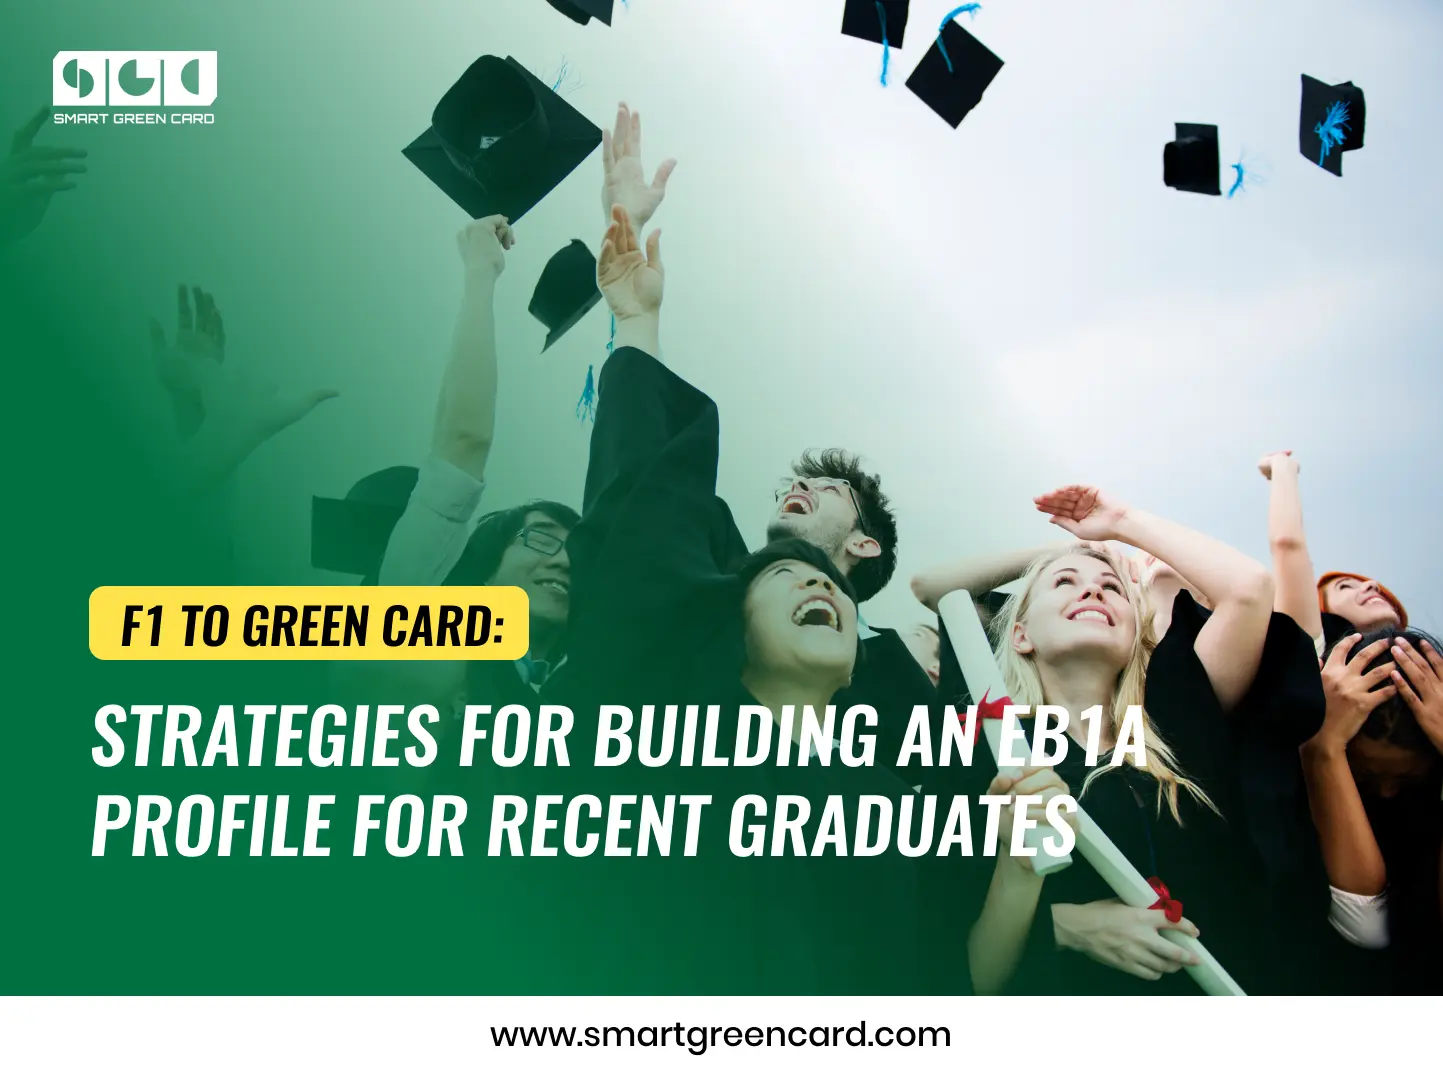 Strategies for Building an EB1A Profile for Recent Graduates.